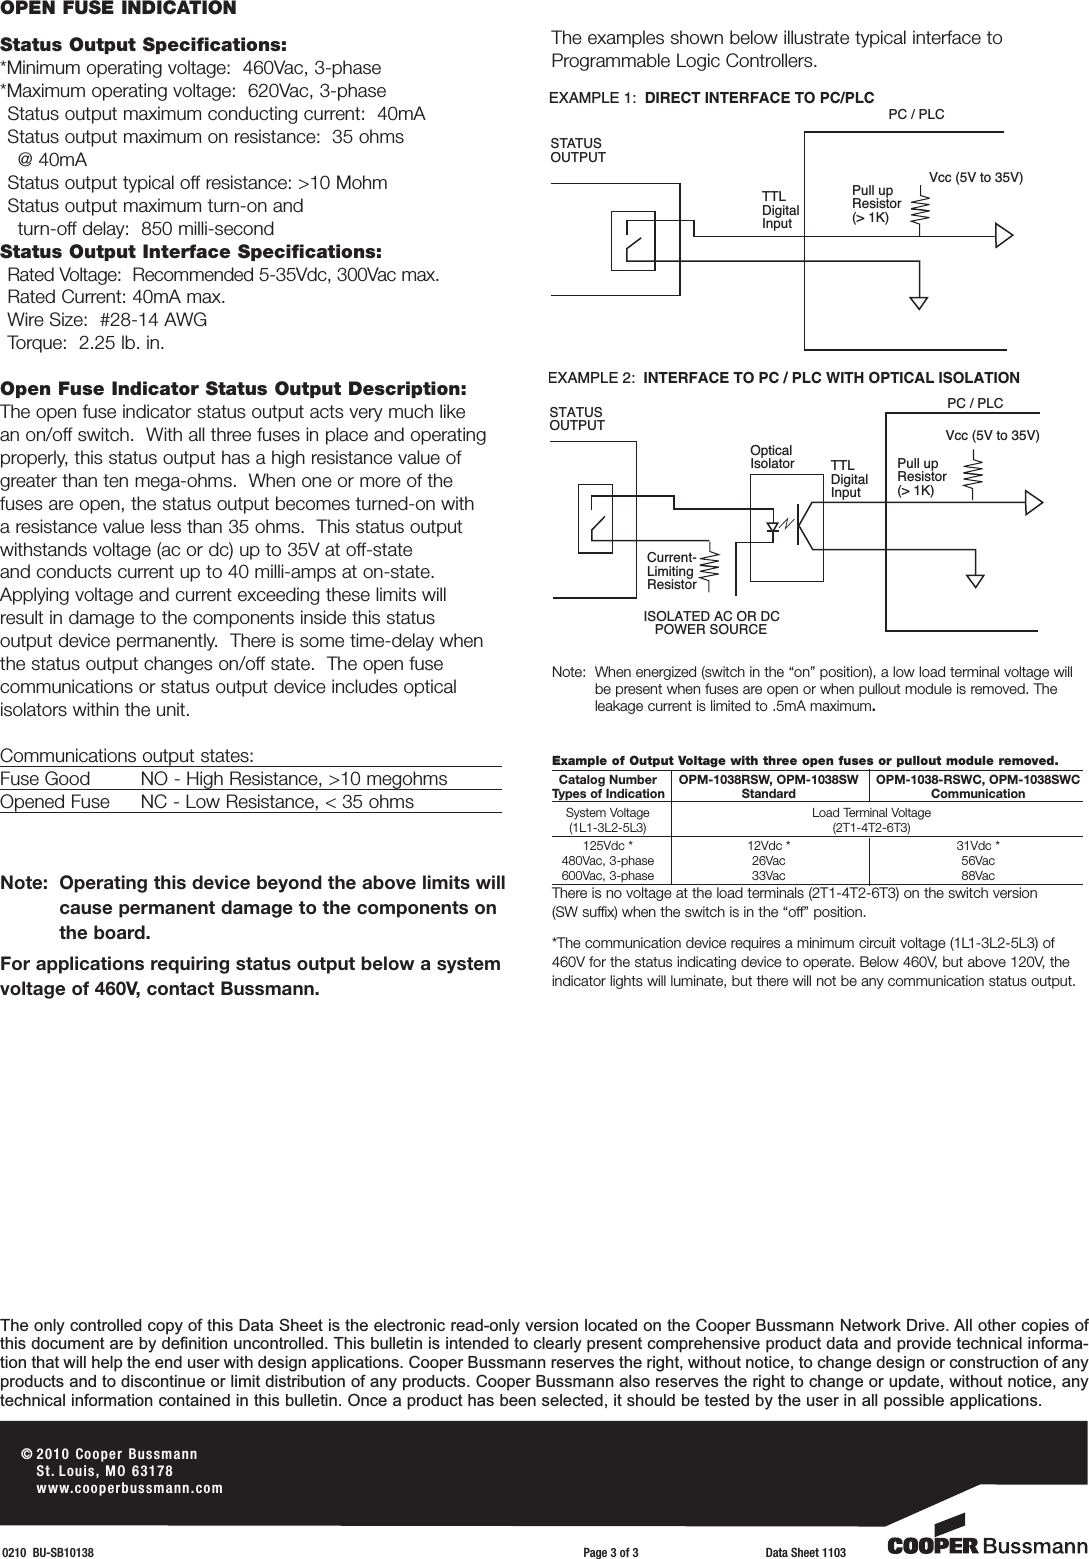 Page 3 of 3 - OPM-1038 S 2-8-10  Brochure